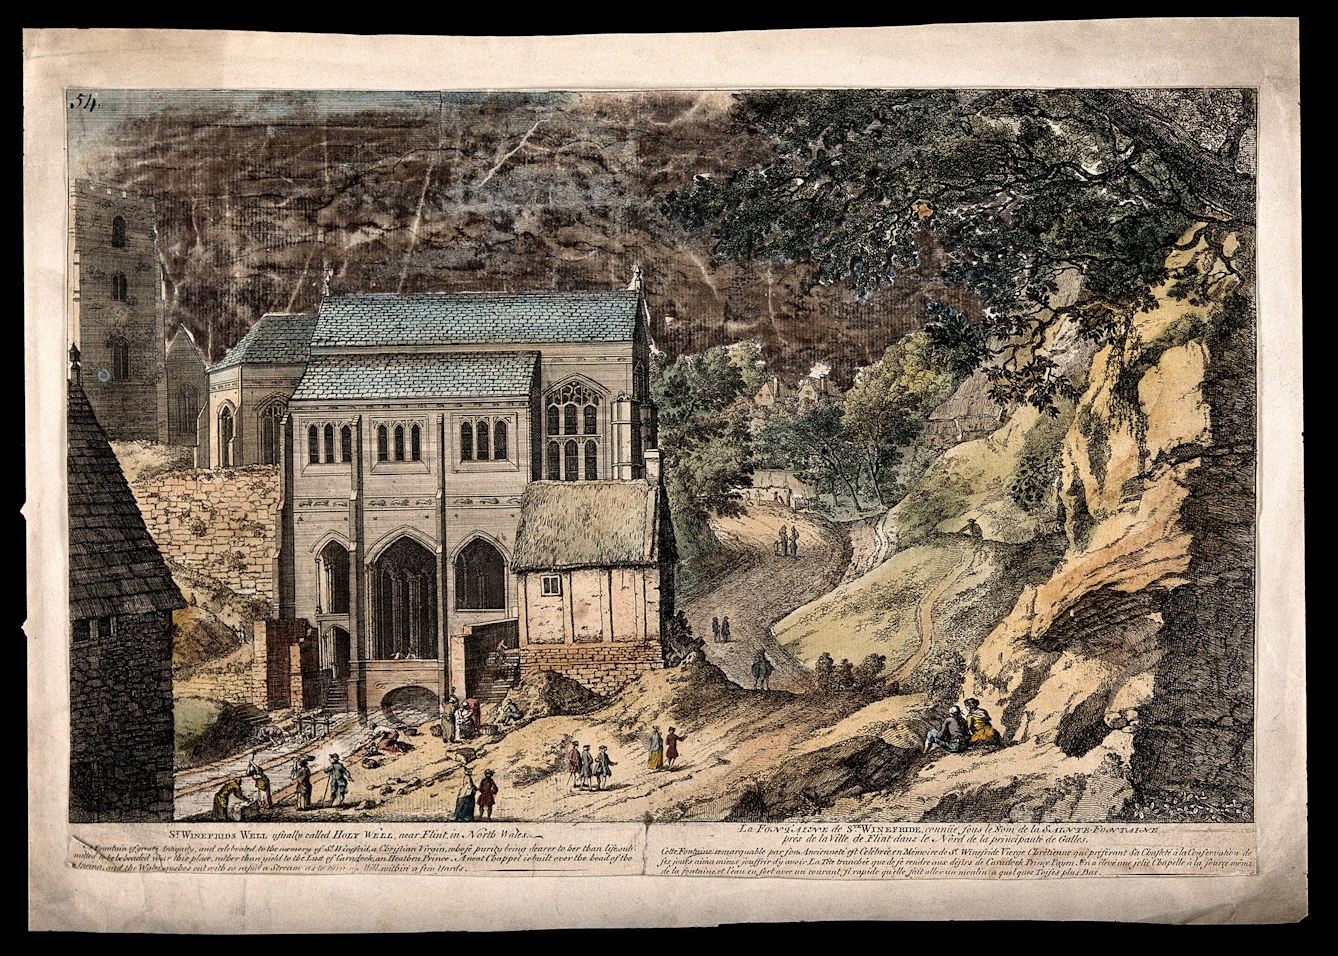 Coloured line engraving depicting St Winifred's Well in Flintshire. The image shows a large stone building over the river where people are washing and collecting water.